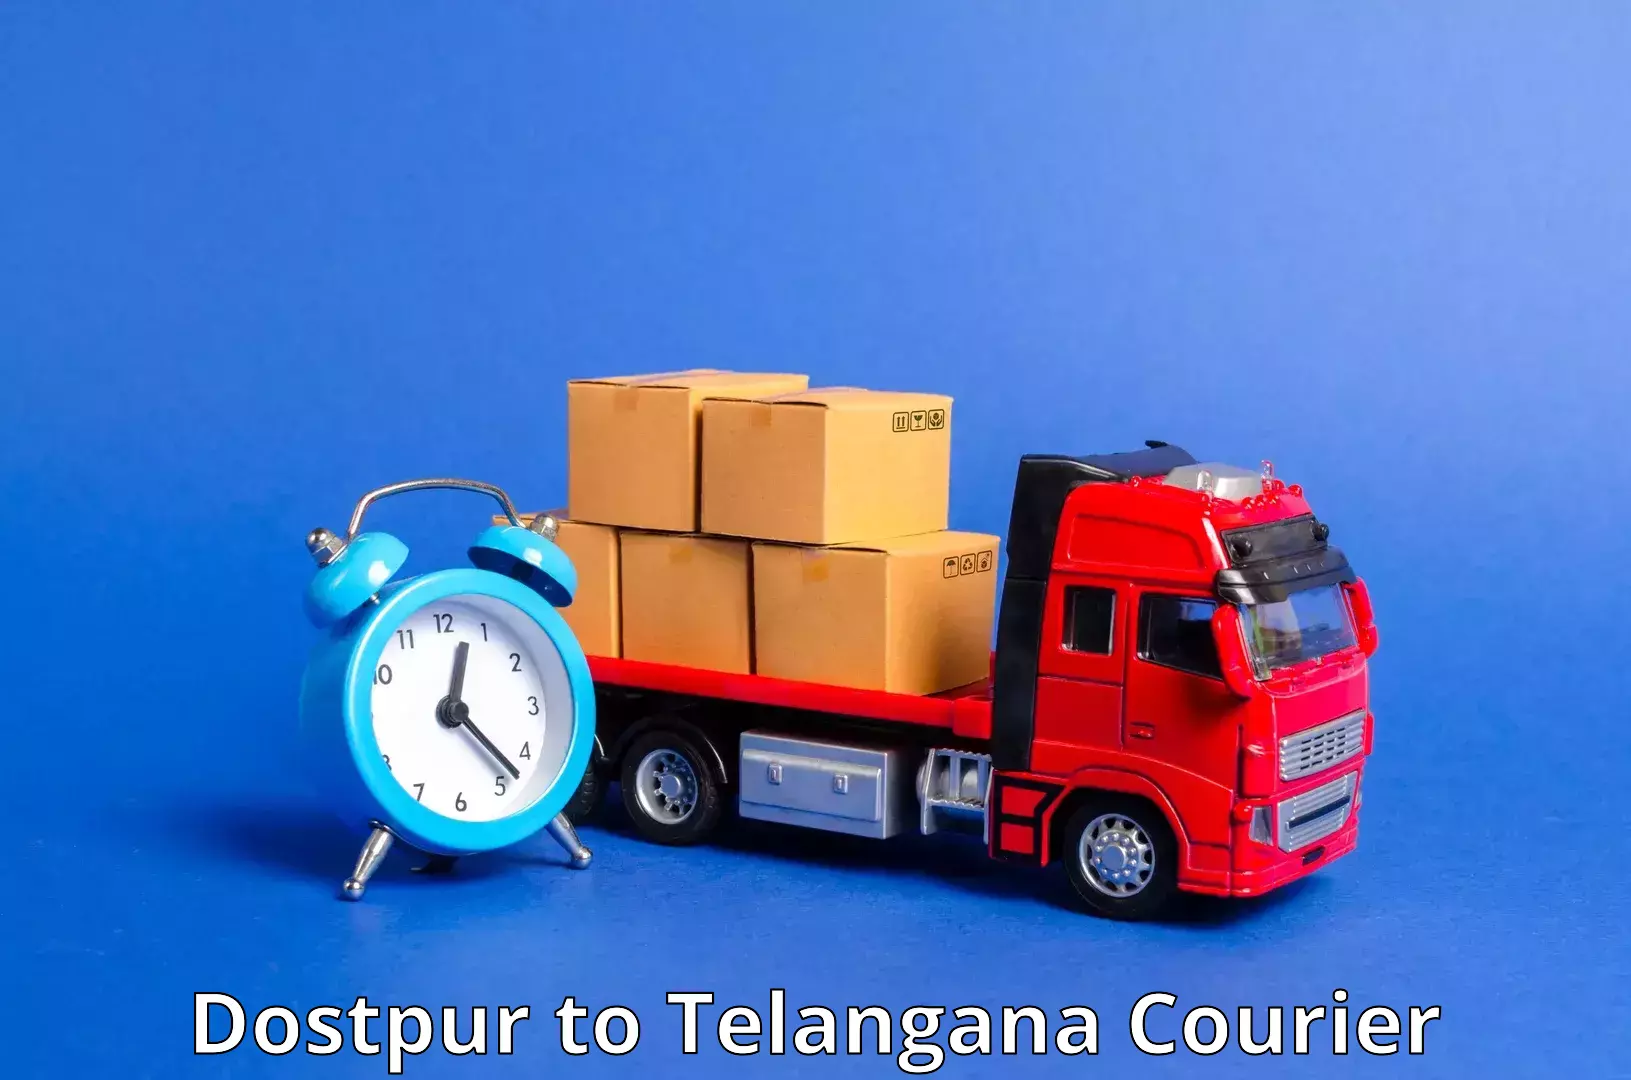 Courier service innovation Dostpur to Secunderabad